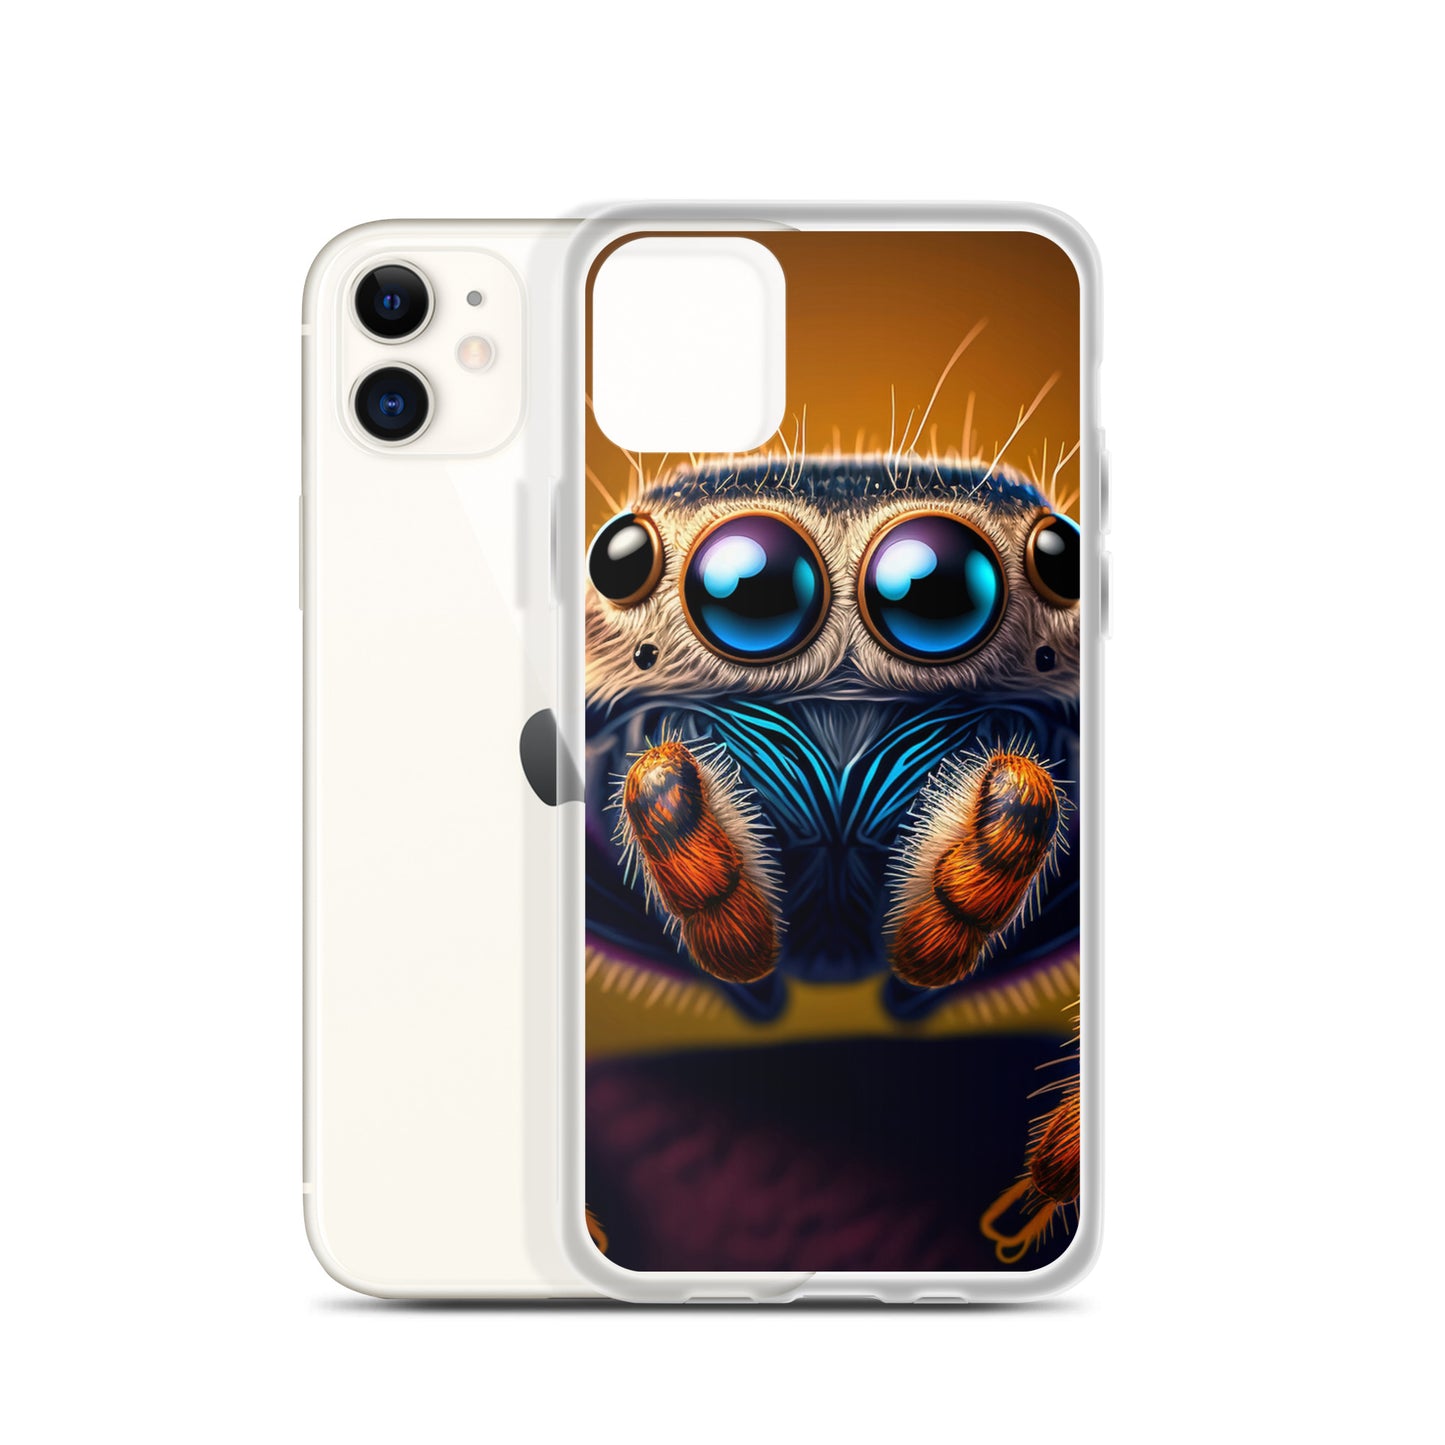 Cute Jumping Spider iPhone Case - Jumping Spiders For Sale - Spiders Source - #1 Regal Jumping Spider Store